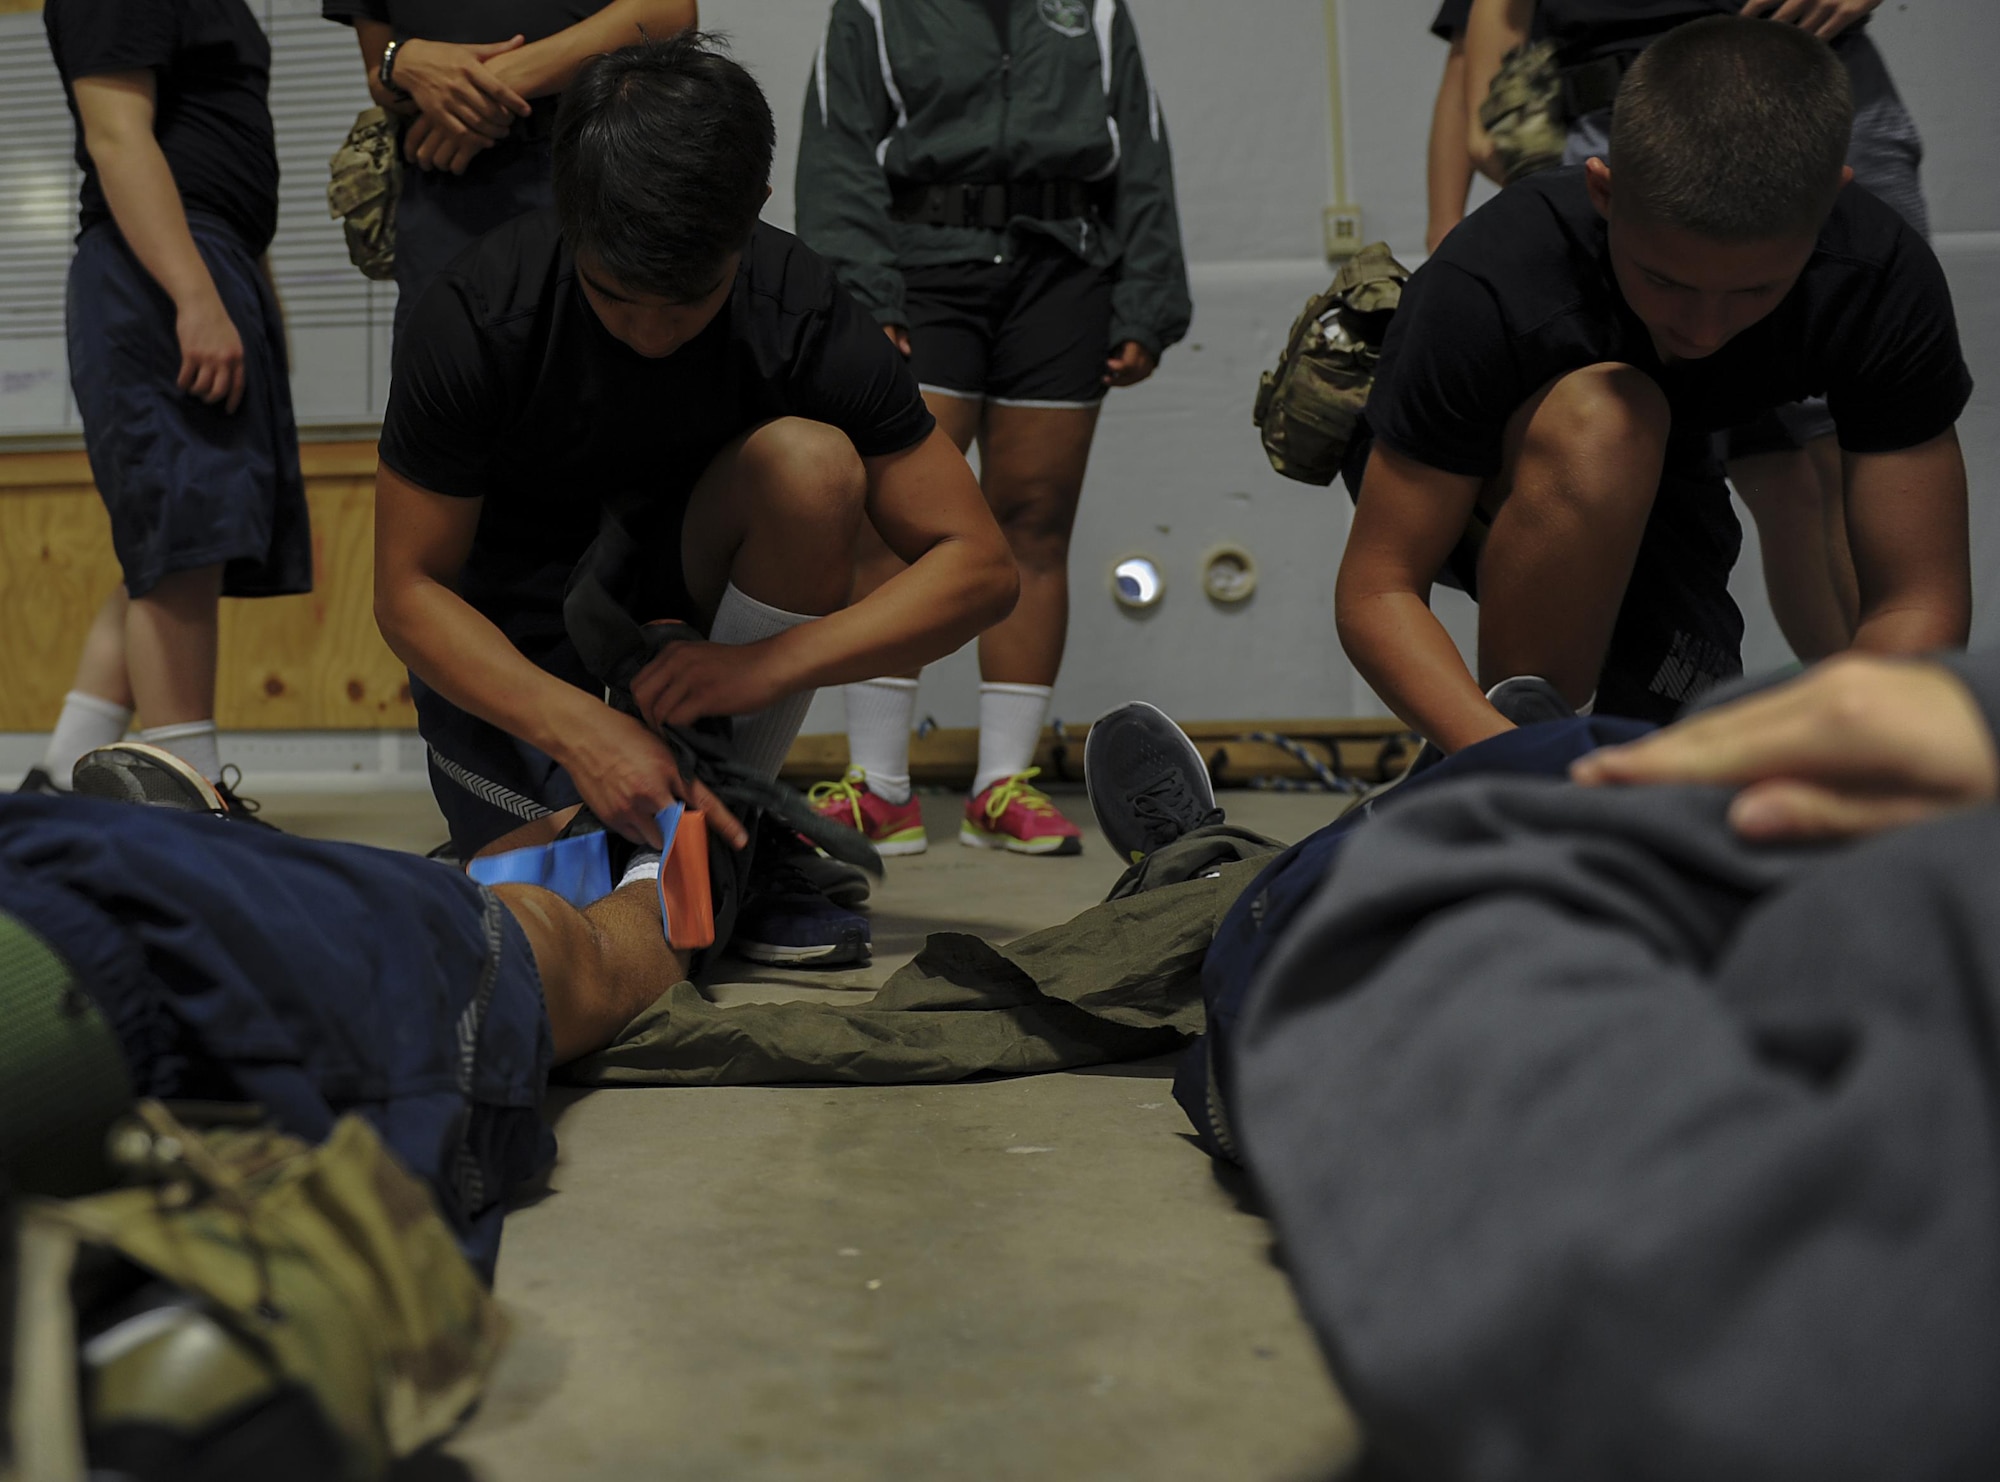 Junior ROTC cadets practice applying splints to broken limbs during Summer Leadership School at Hurlburt Field, FLa., June 29, 2017. Cadets were given a crash-course on how to administer life-saving care on the battlefield, such as quickly stabilizing patients and getting them out of harm's way. (U.S. Air Force photo by Airman 1st Class Rachel Yates)